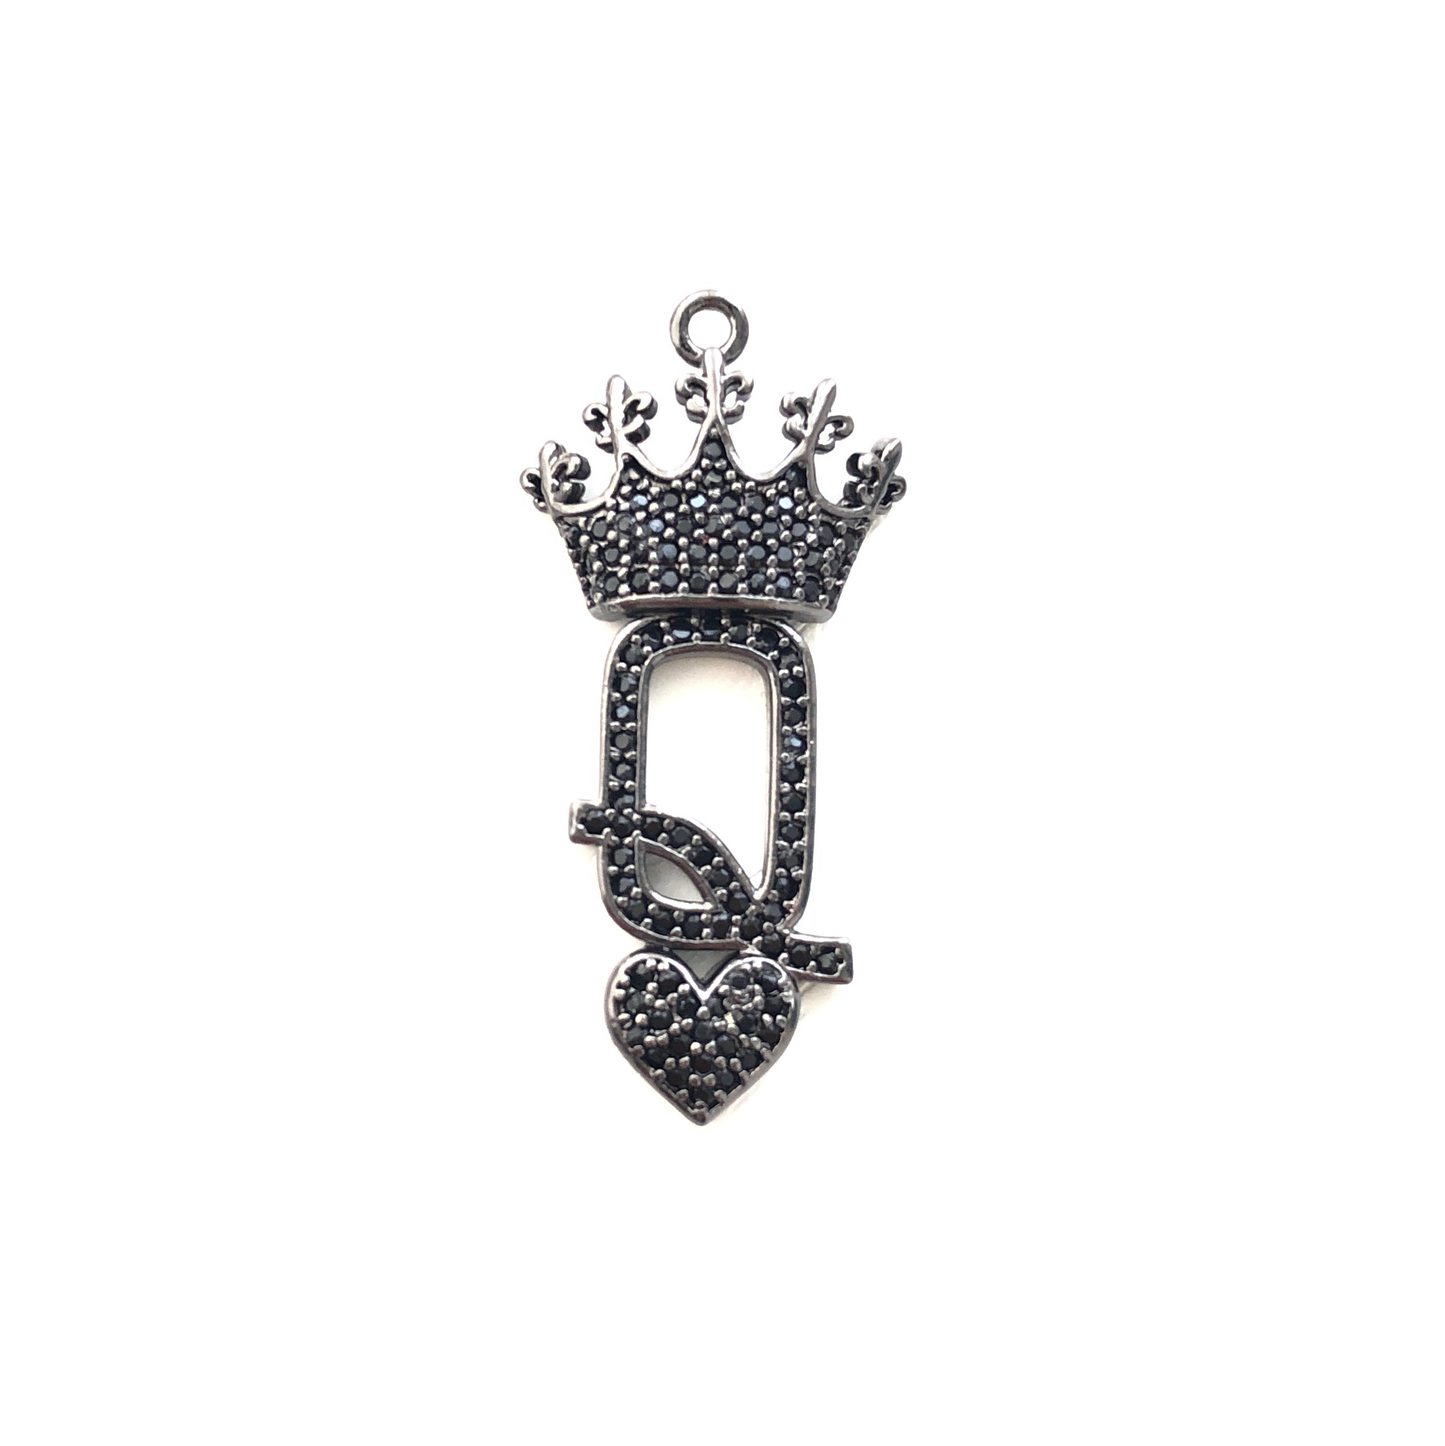 10pcs/lot 36.5*16mm CZ Paved Queen of Heart Charms Black on Black CZ Paved Charms Queen Charms Words & Quotes Charms Beads Beyond